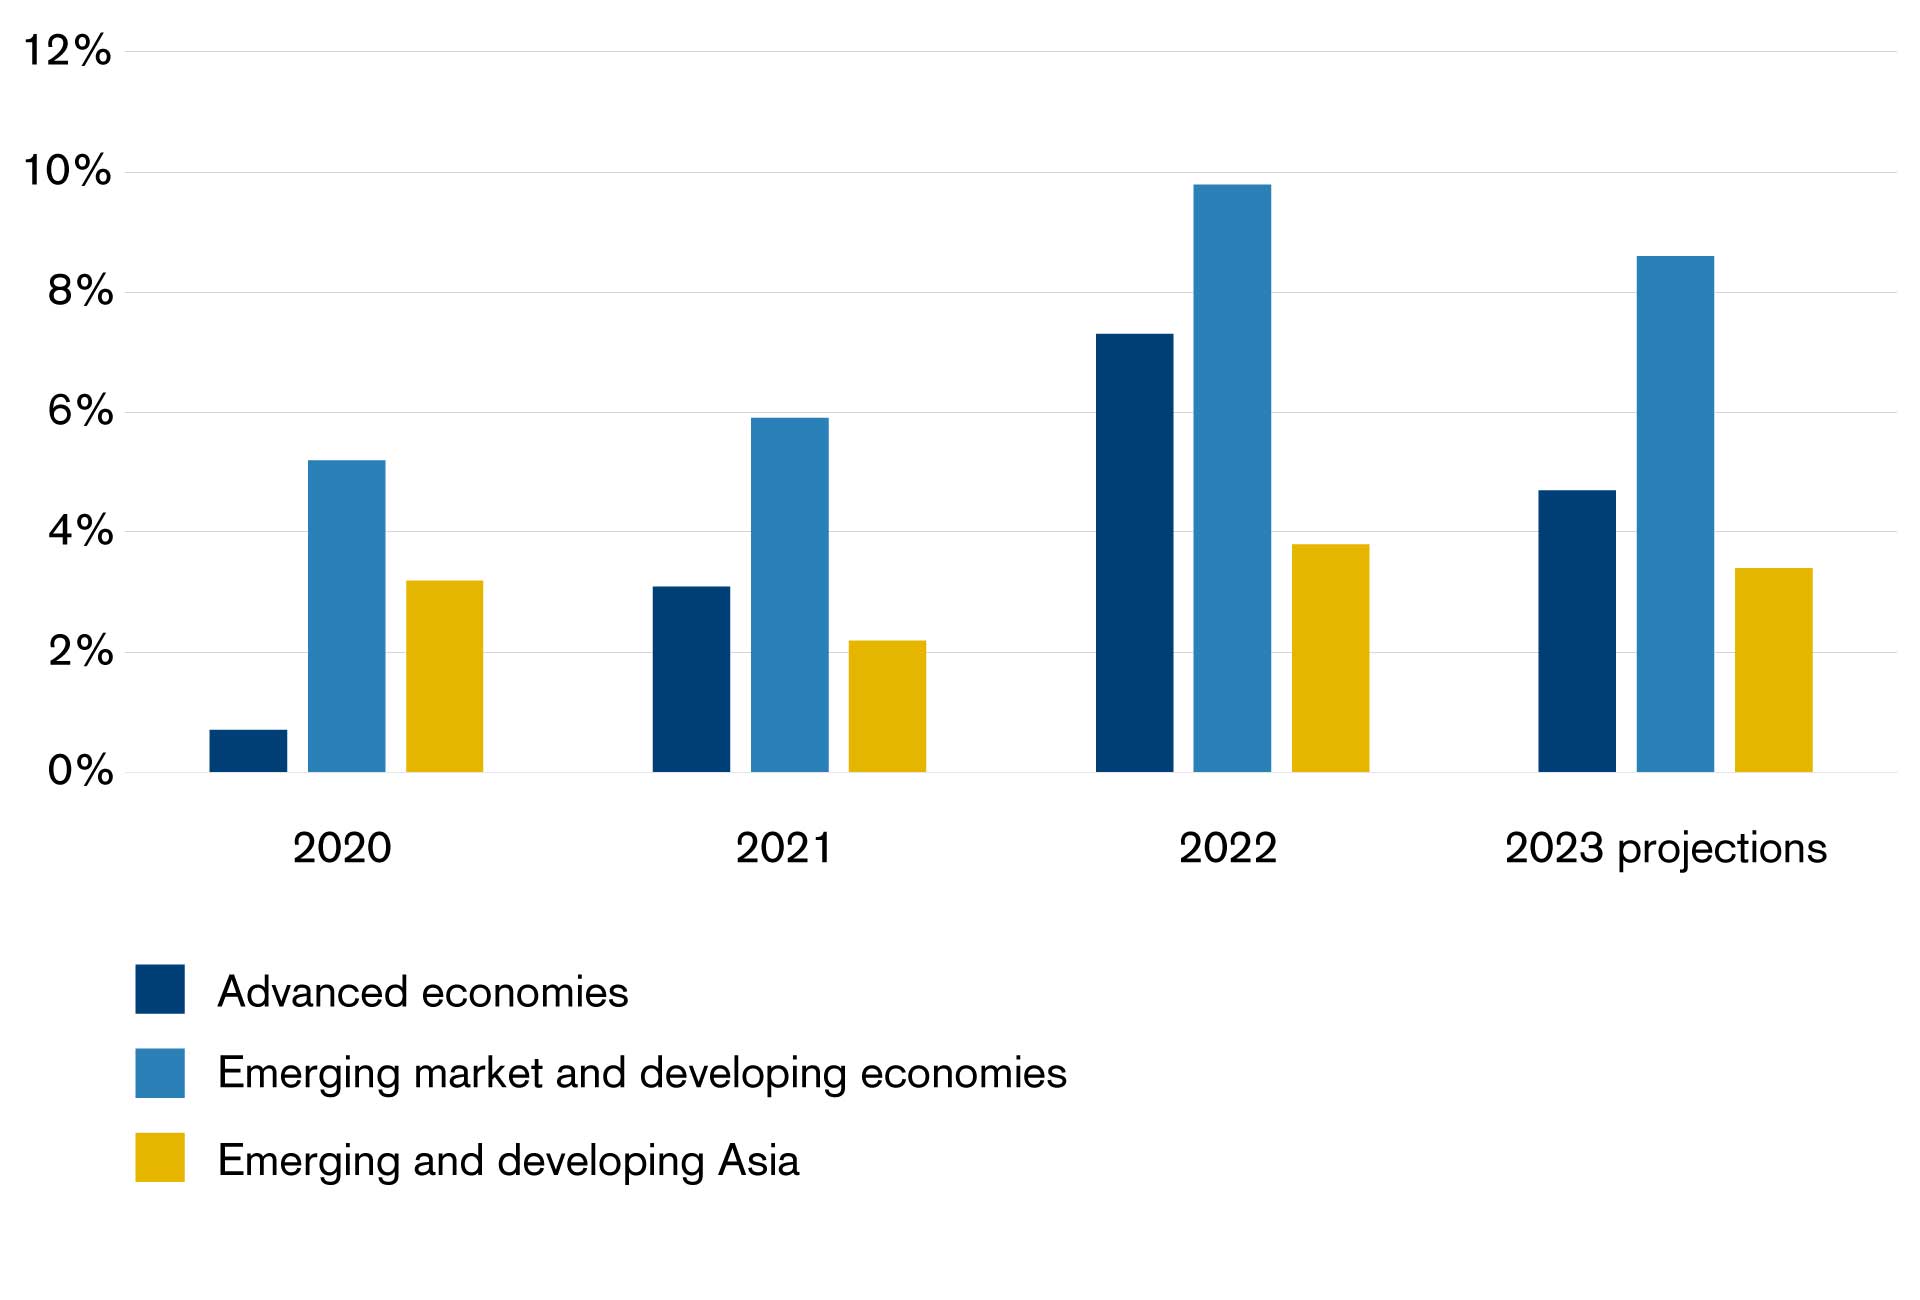 The chart below compares the evolution of inflation between emerging and developed markets and the forecast for 2023 according to the IMF’s recent World Economic Outlook report